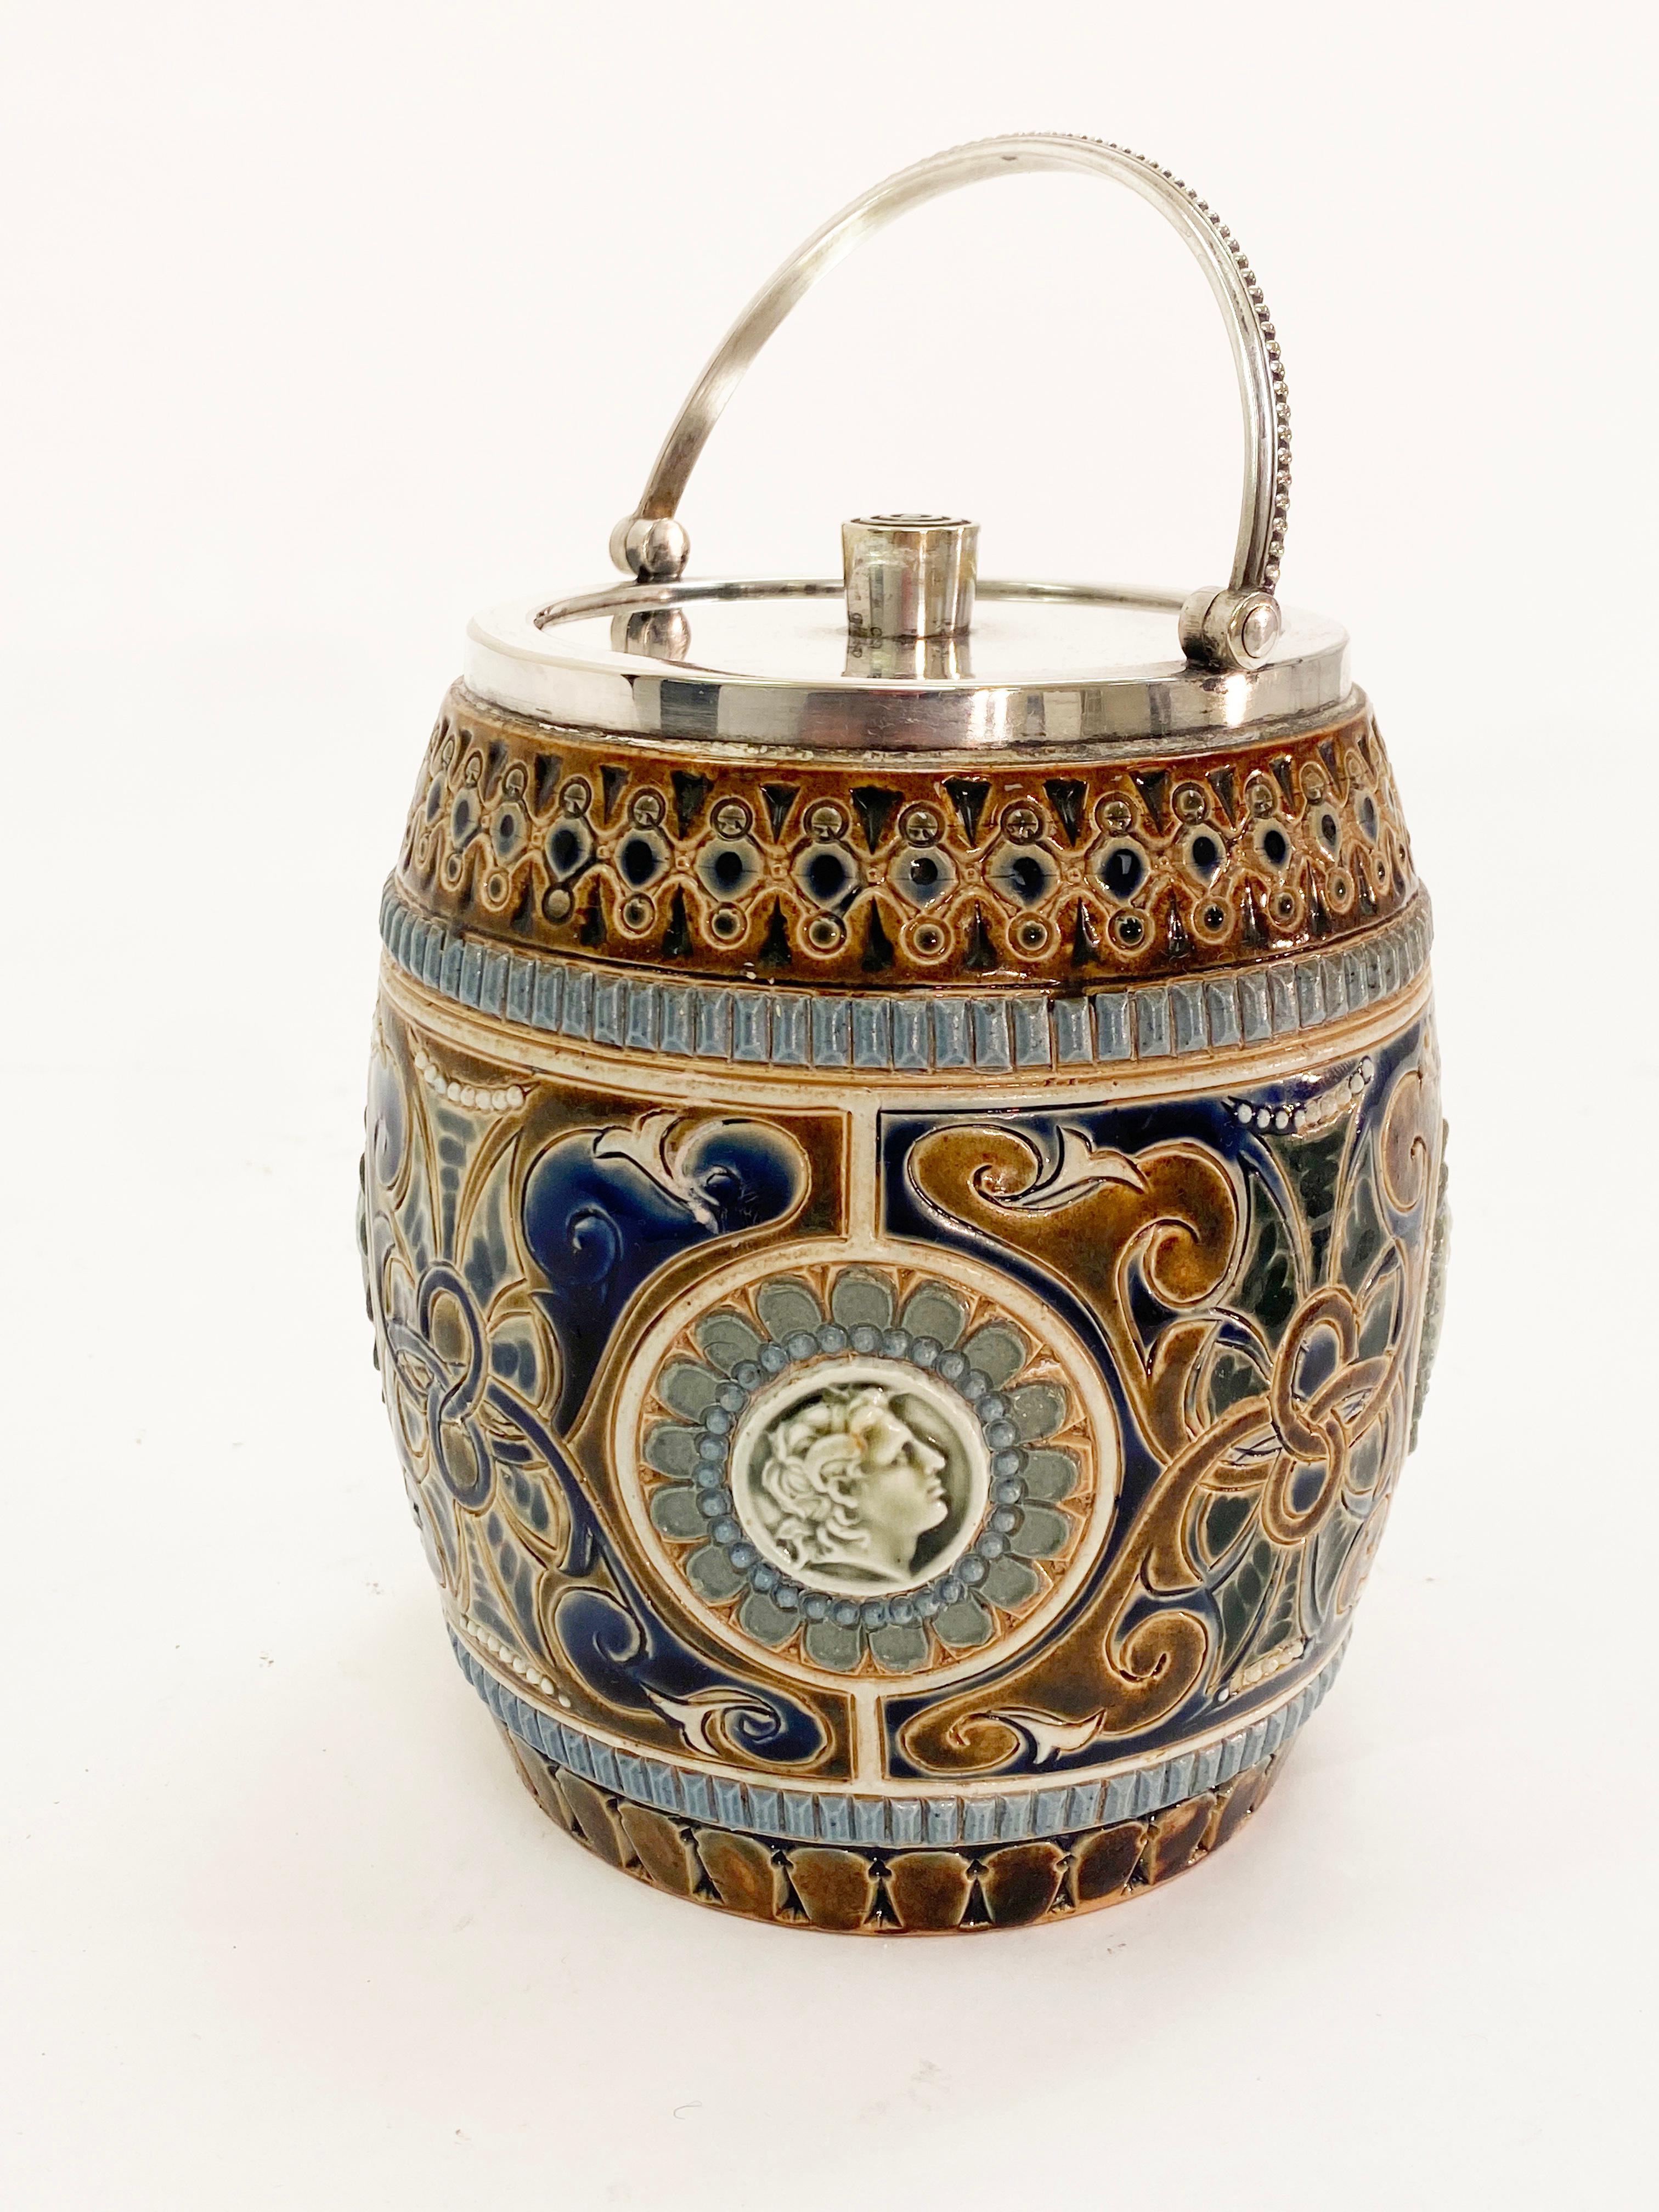 Beautifully crafted biscuit barrel with silver plate lid. Doulton Lambeth manufactured with ornate designs that cover the entire container. Grecian faces surrounding the structure of the barrel. 

19th century

Measures: Height 6”
Width